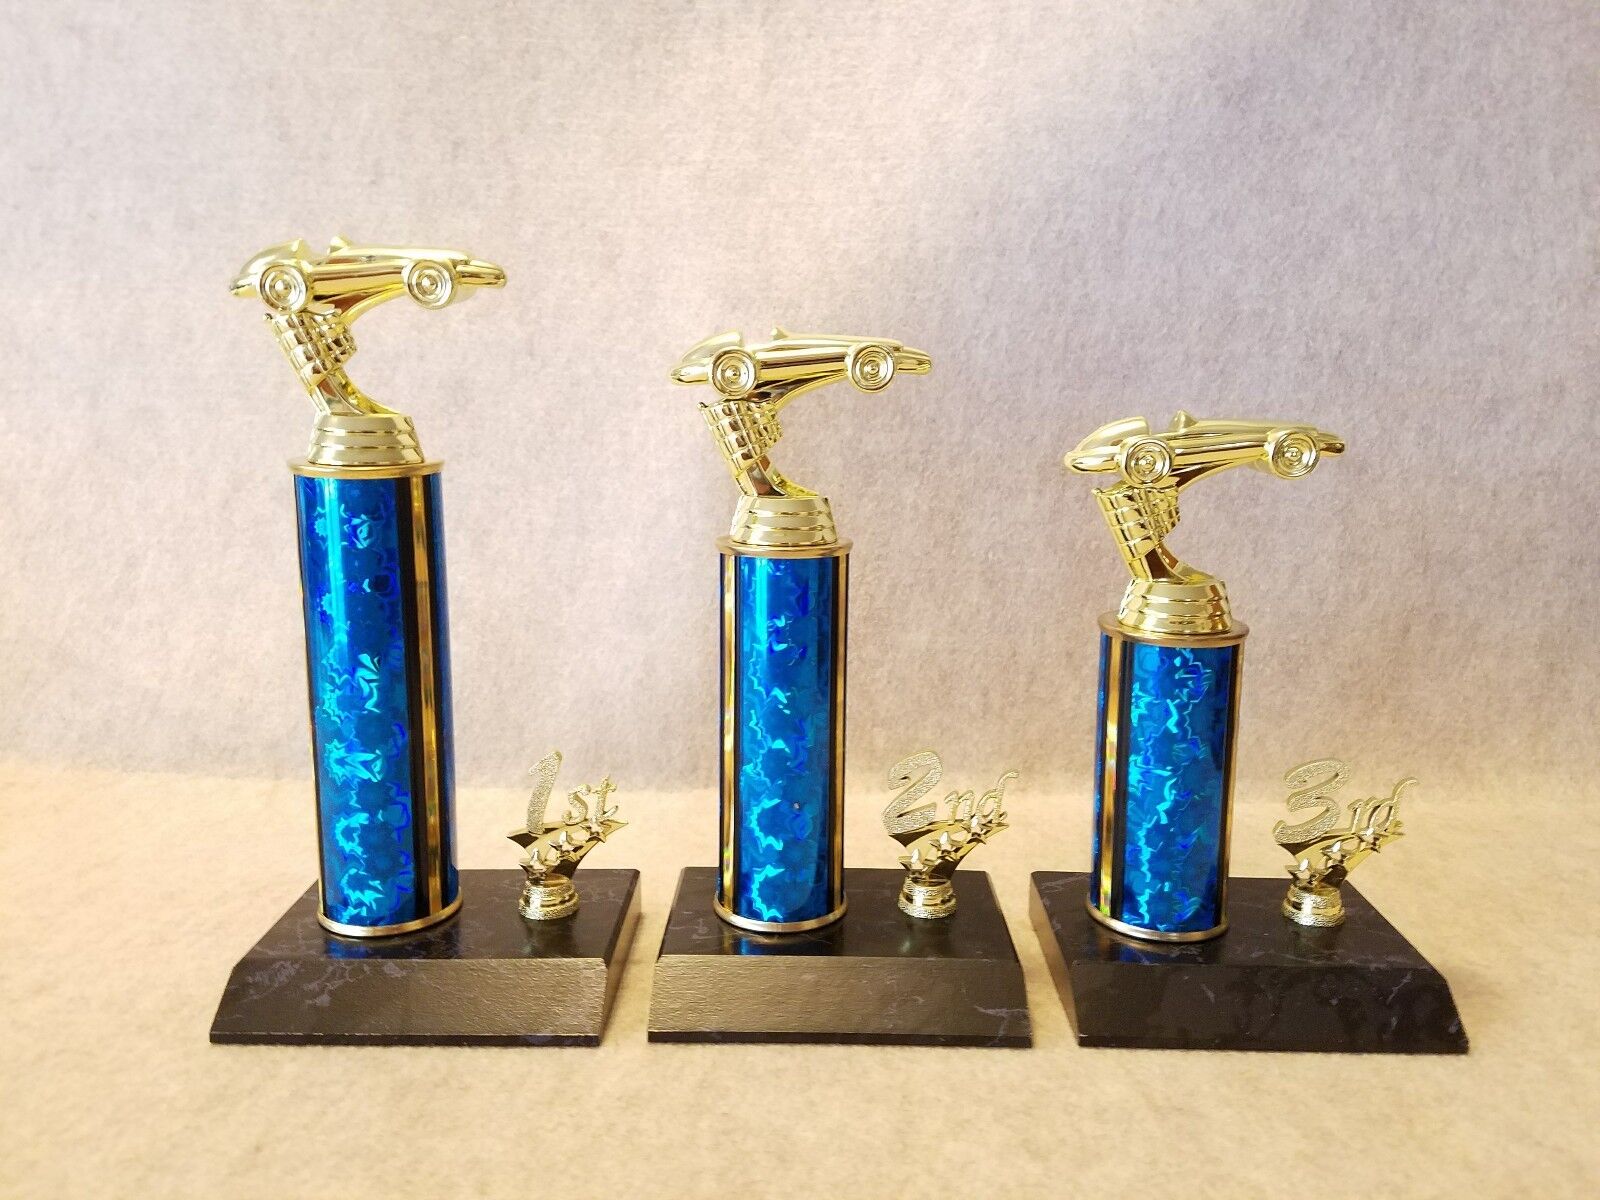 3 Trophies for Pinewood Derby 1st, 2nd, 3rd place. with plaques - Trophy